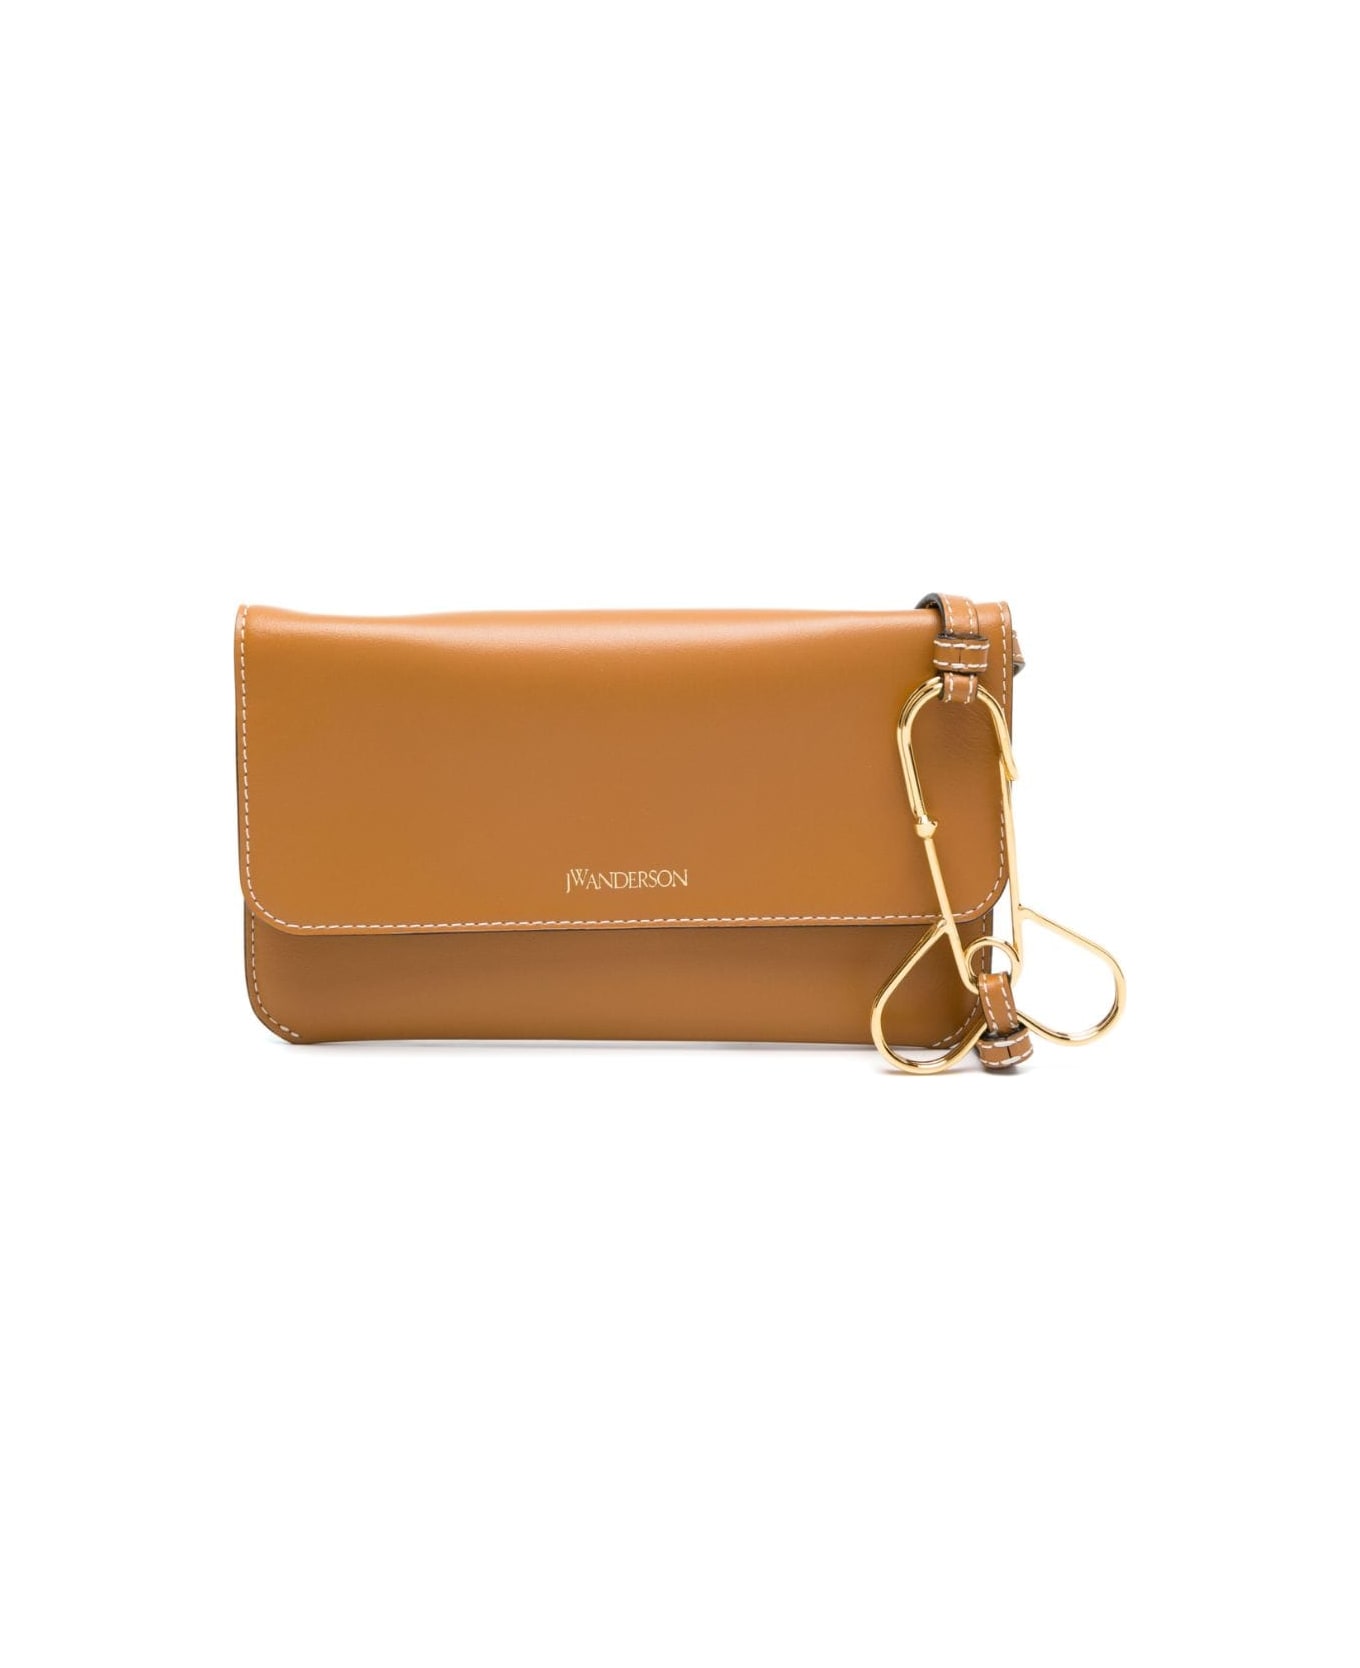 J.W. Anderson Chain Phone Pouch - Pecan